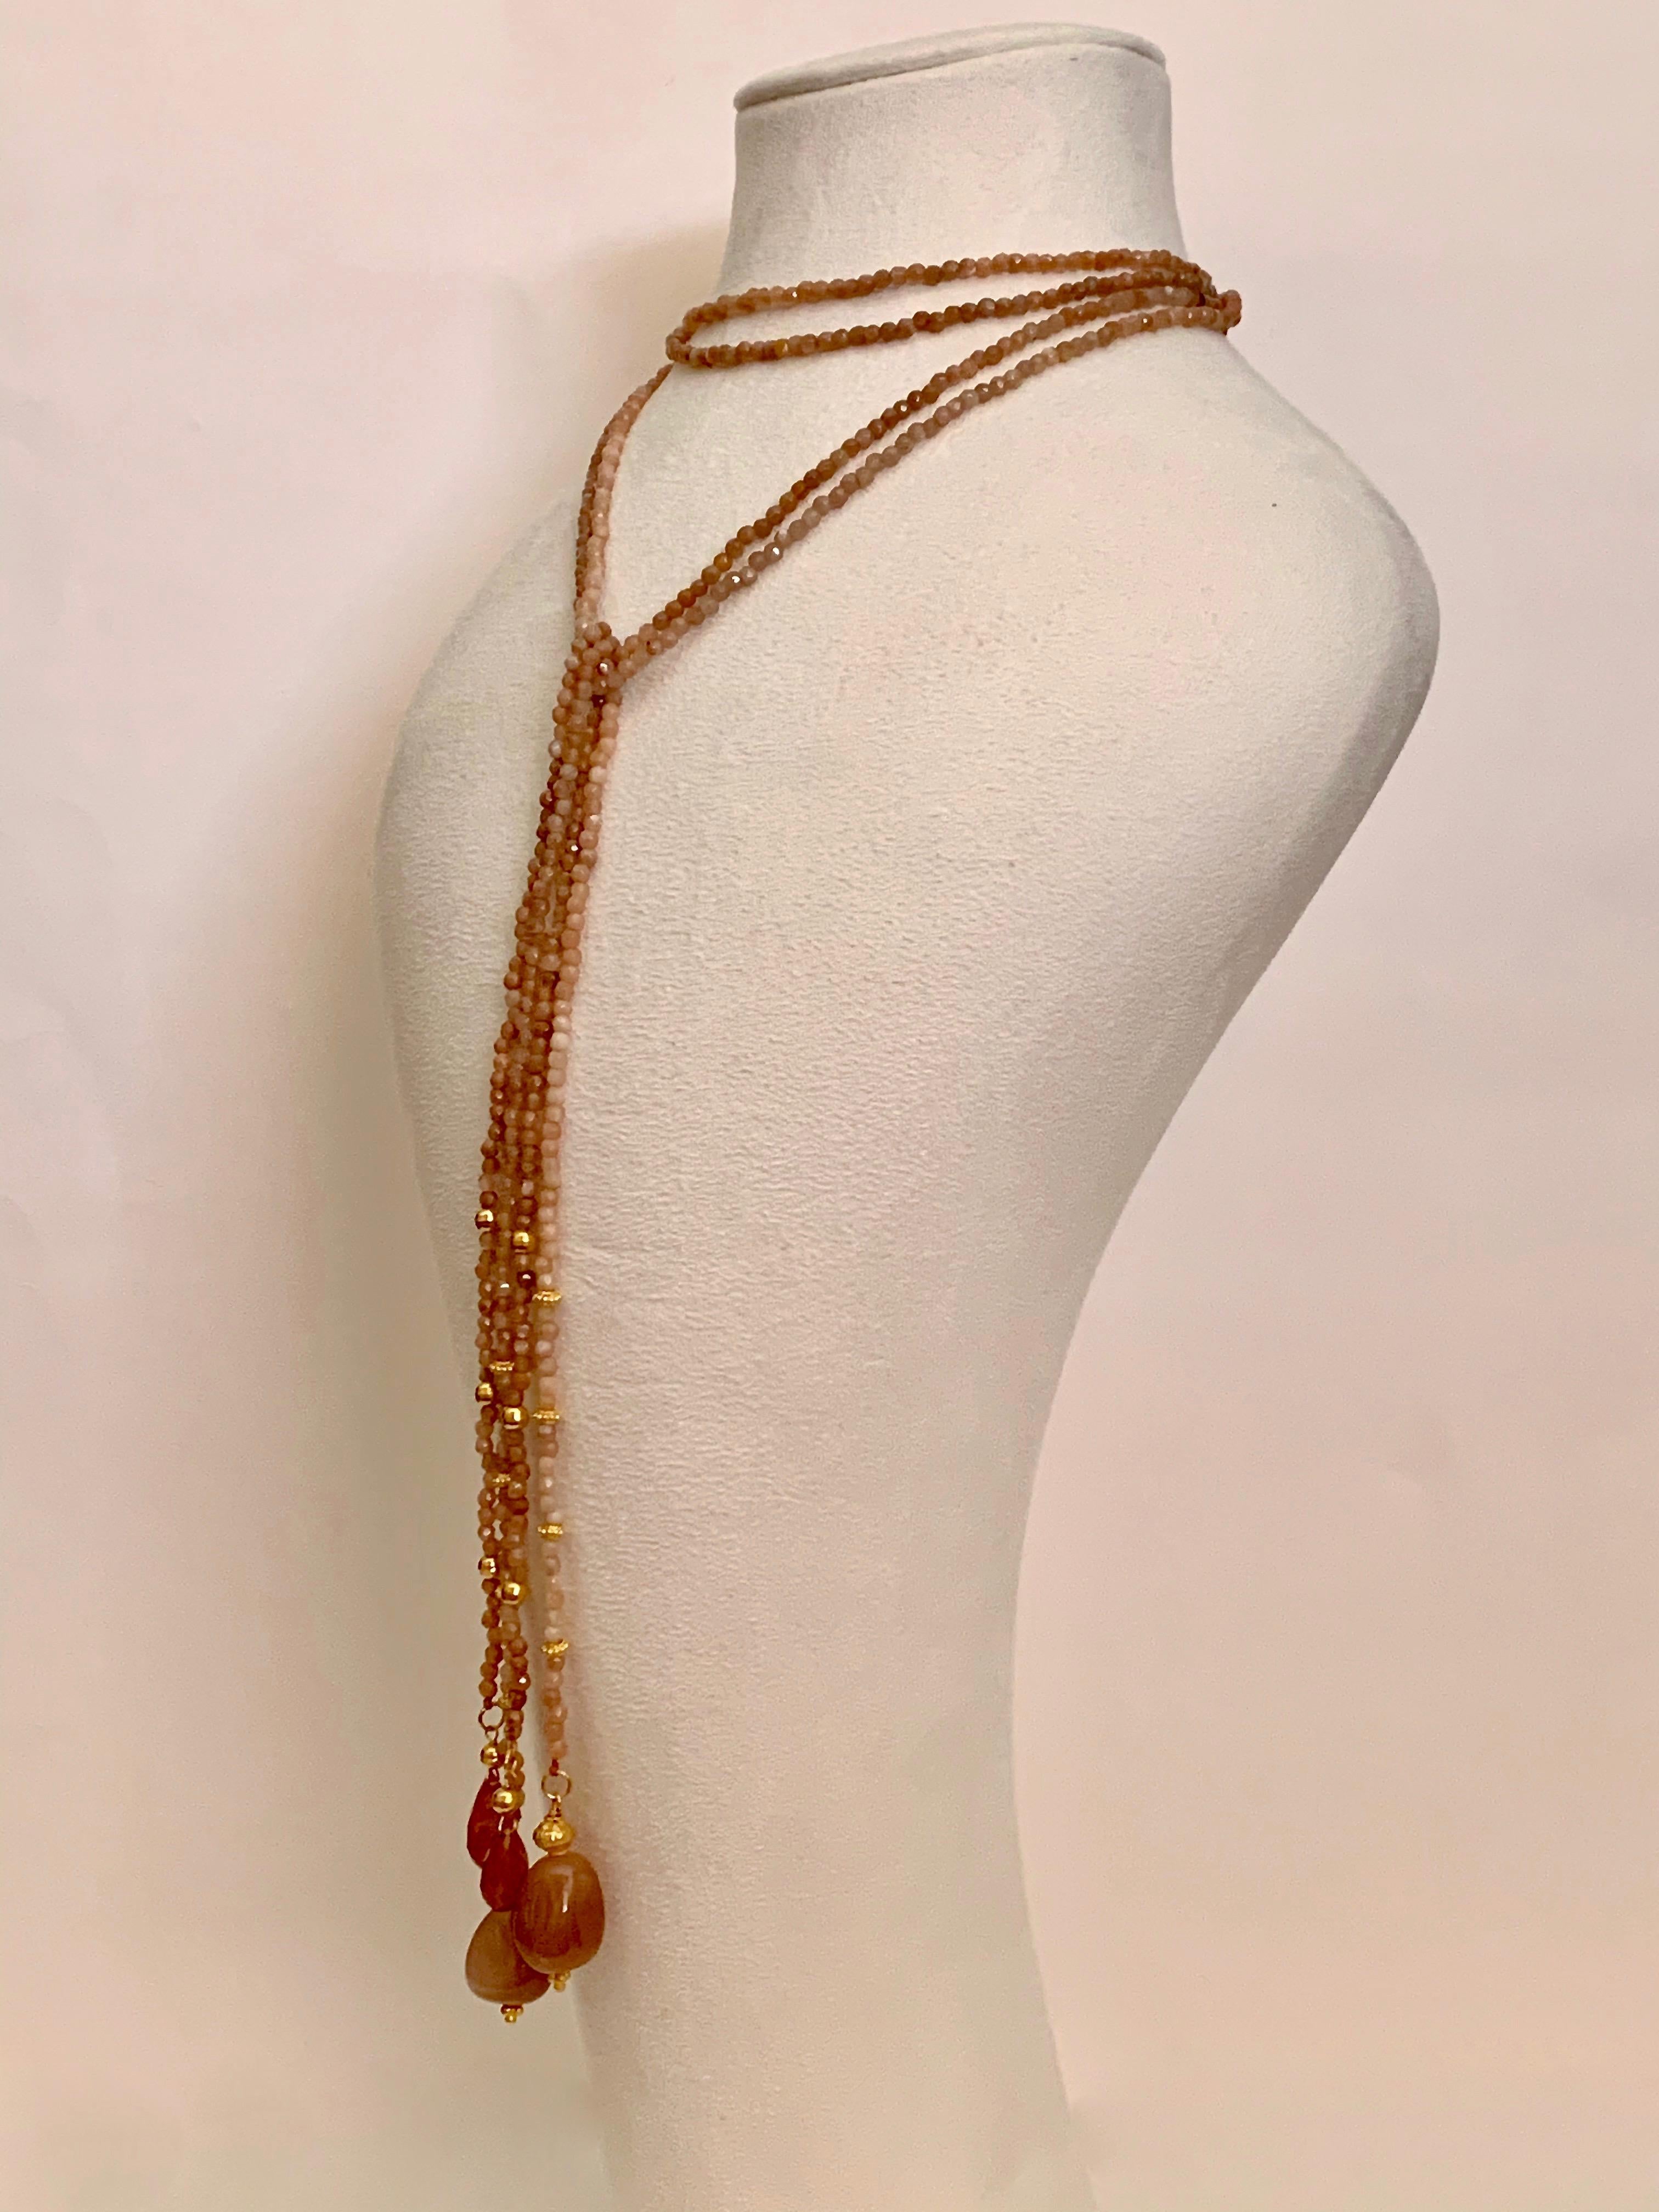 Set of two beaded rope necklaces made of 18 Karat solid yellow gold and untreated moonstones.
The gold has a satin finish.
You can wear this necklace in several ways ( please refer to the photos )
The length of the rope necklaces are 13.00cm and